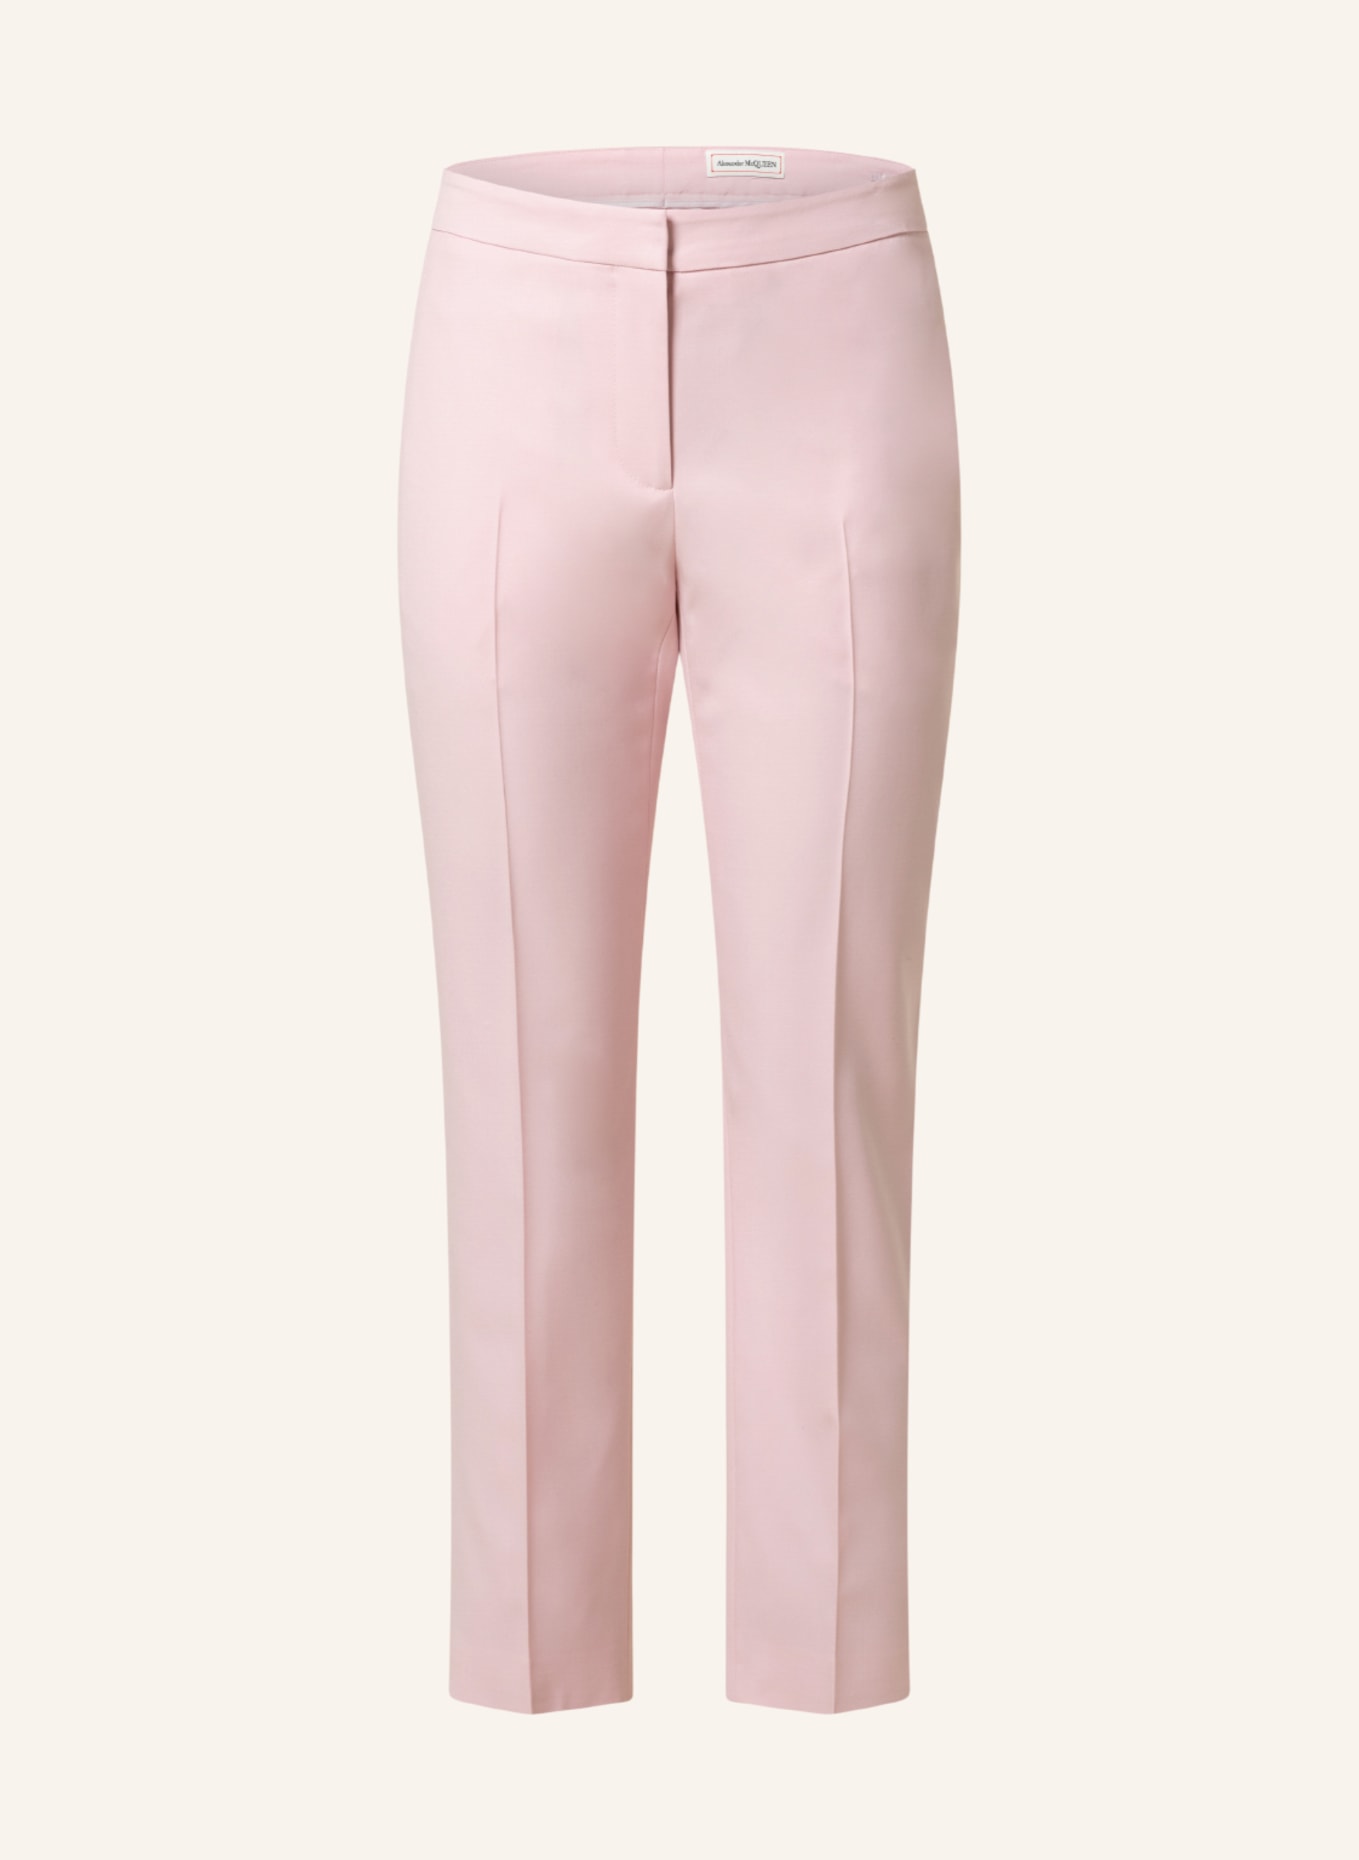 Alexander McQUEEN 7/8 trousers, Color: LIGHT PINK (Image 1)